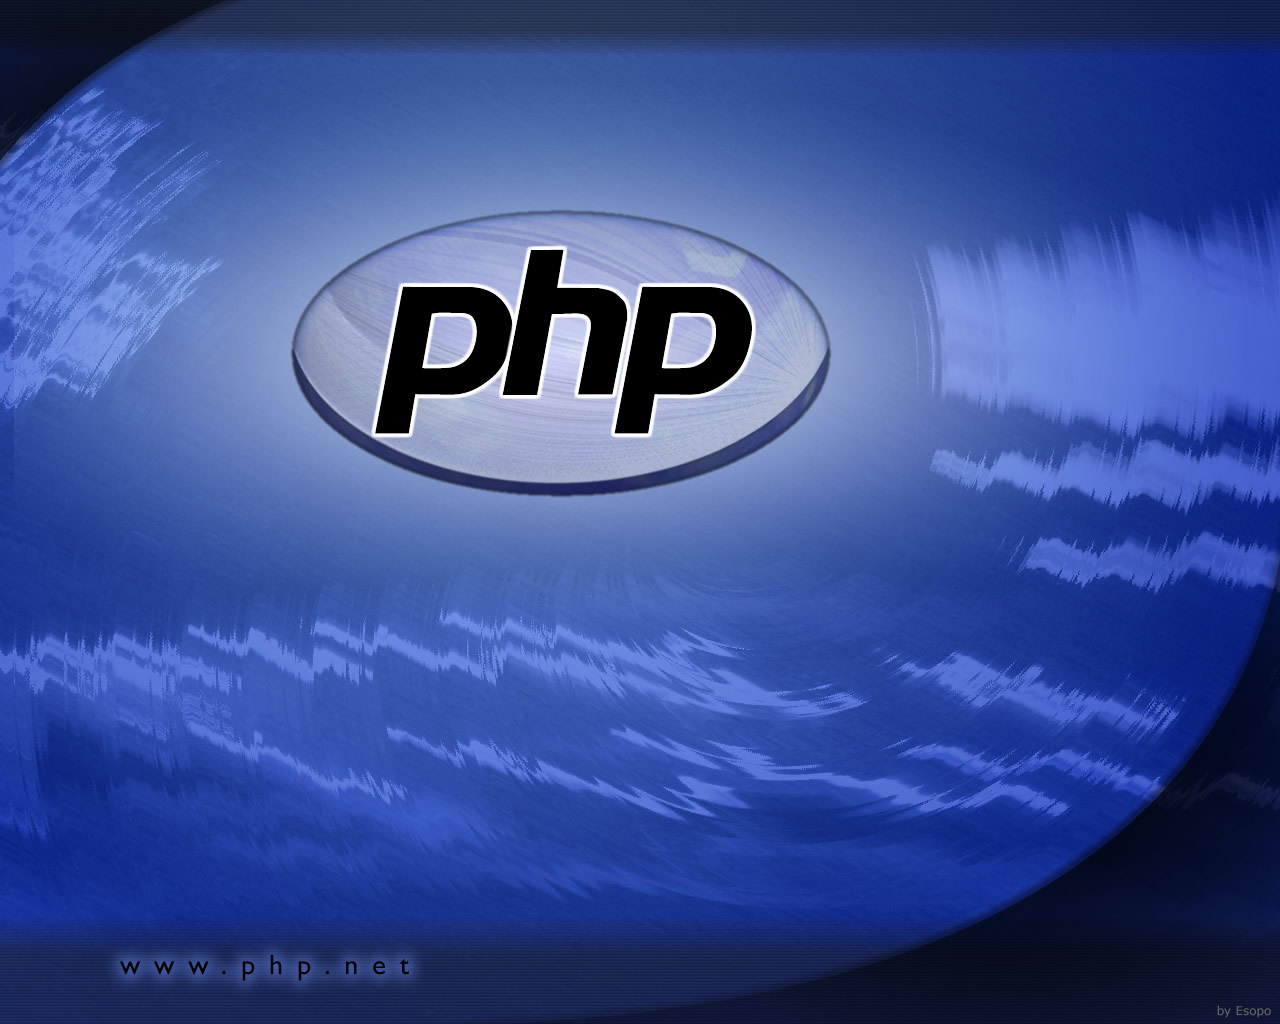 Php Programmer Wallpaper Images Pictures   Becuo 1280x1024